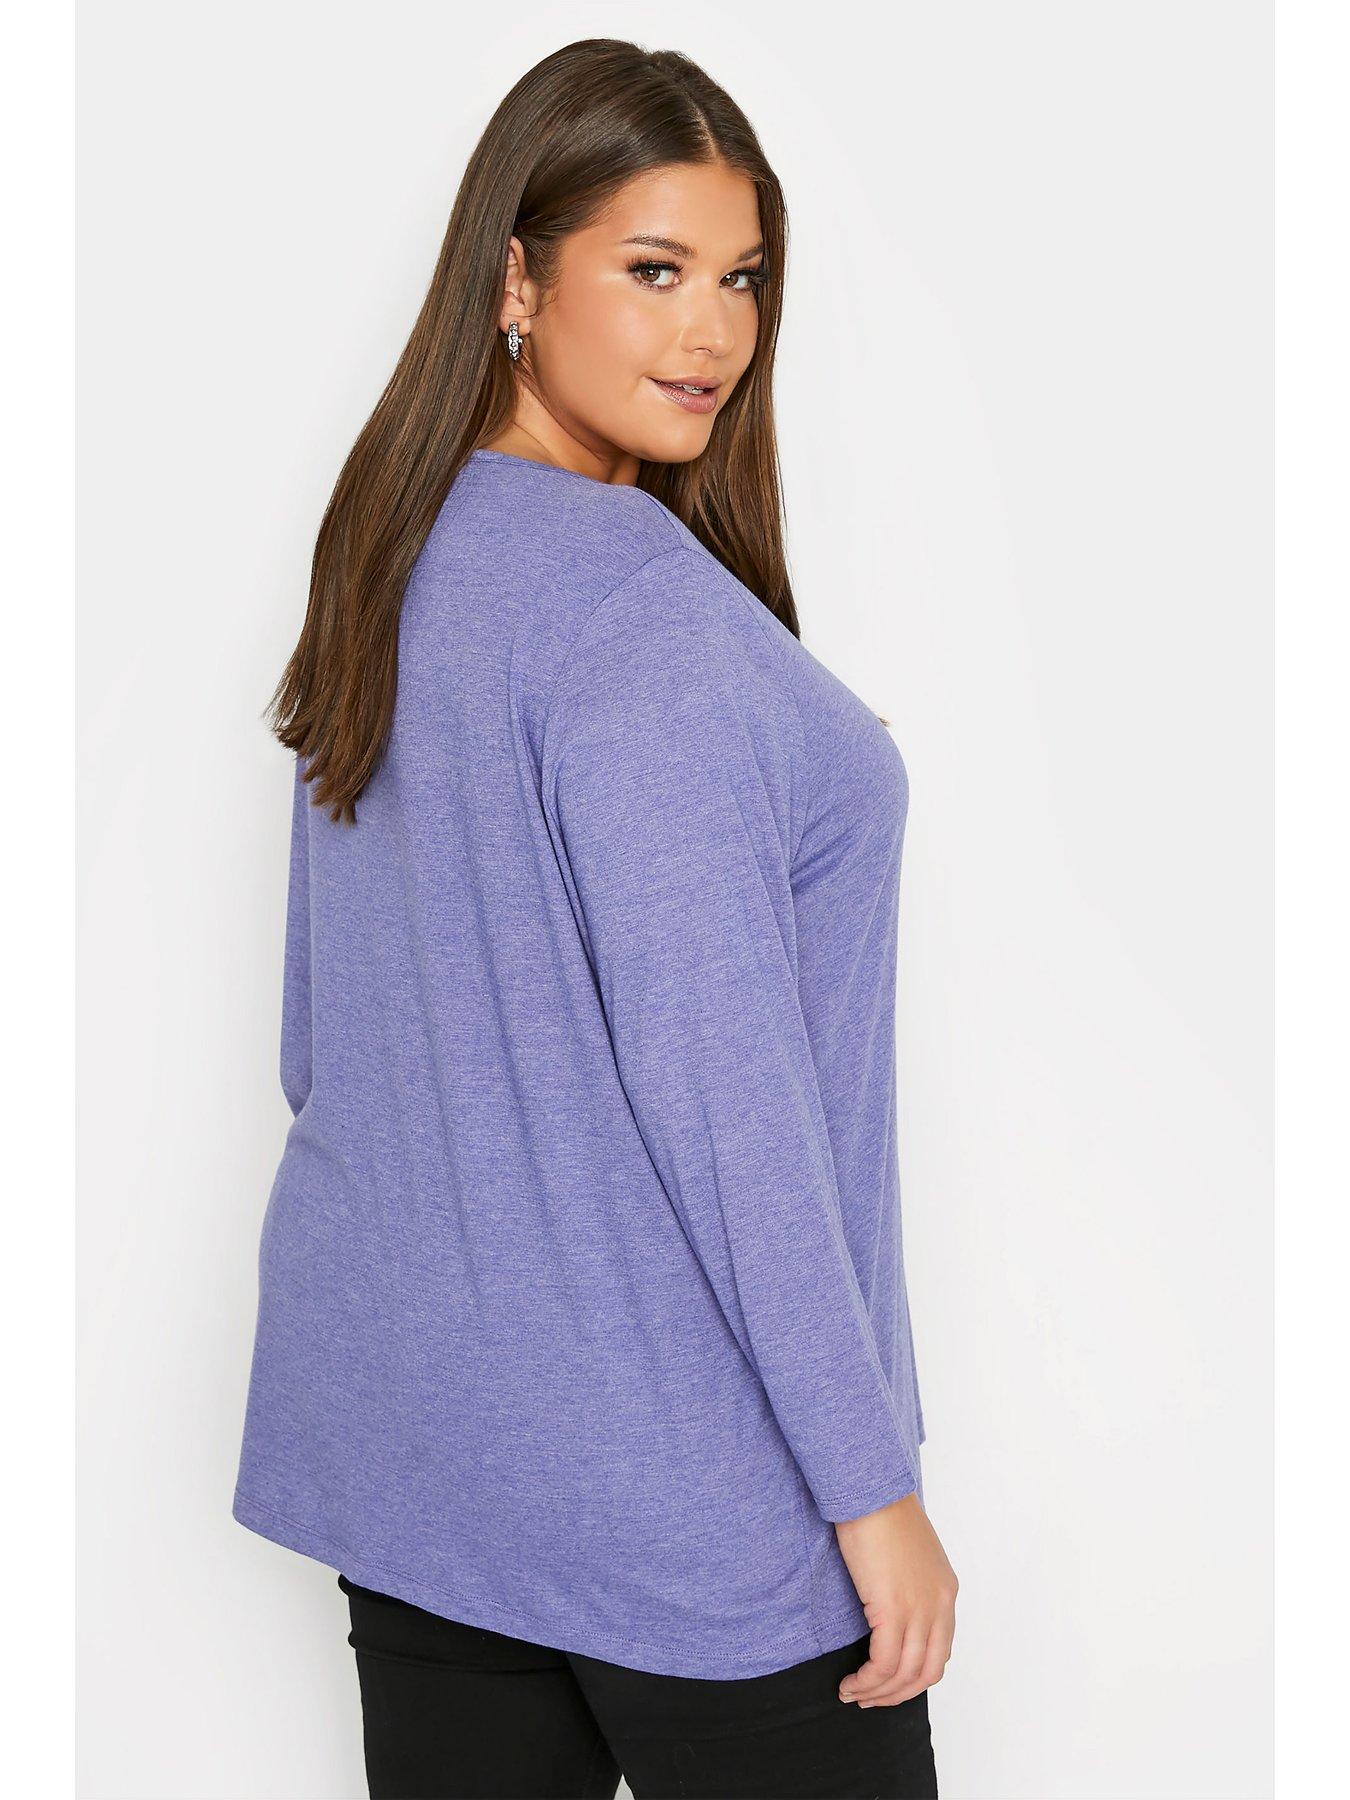  Yours Long Sleeve Scoop Neck T-Shirt - Blue